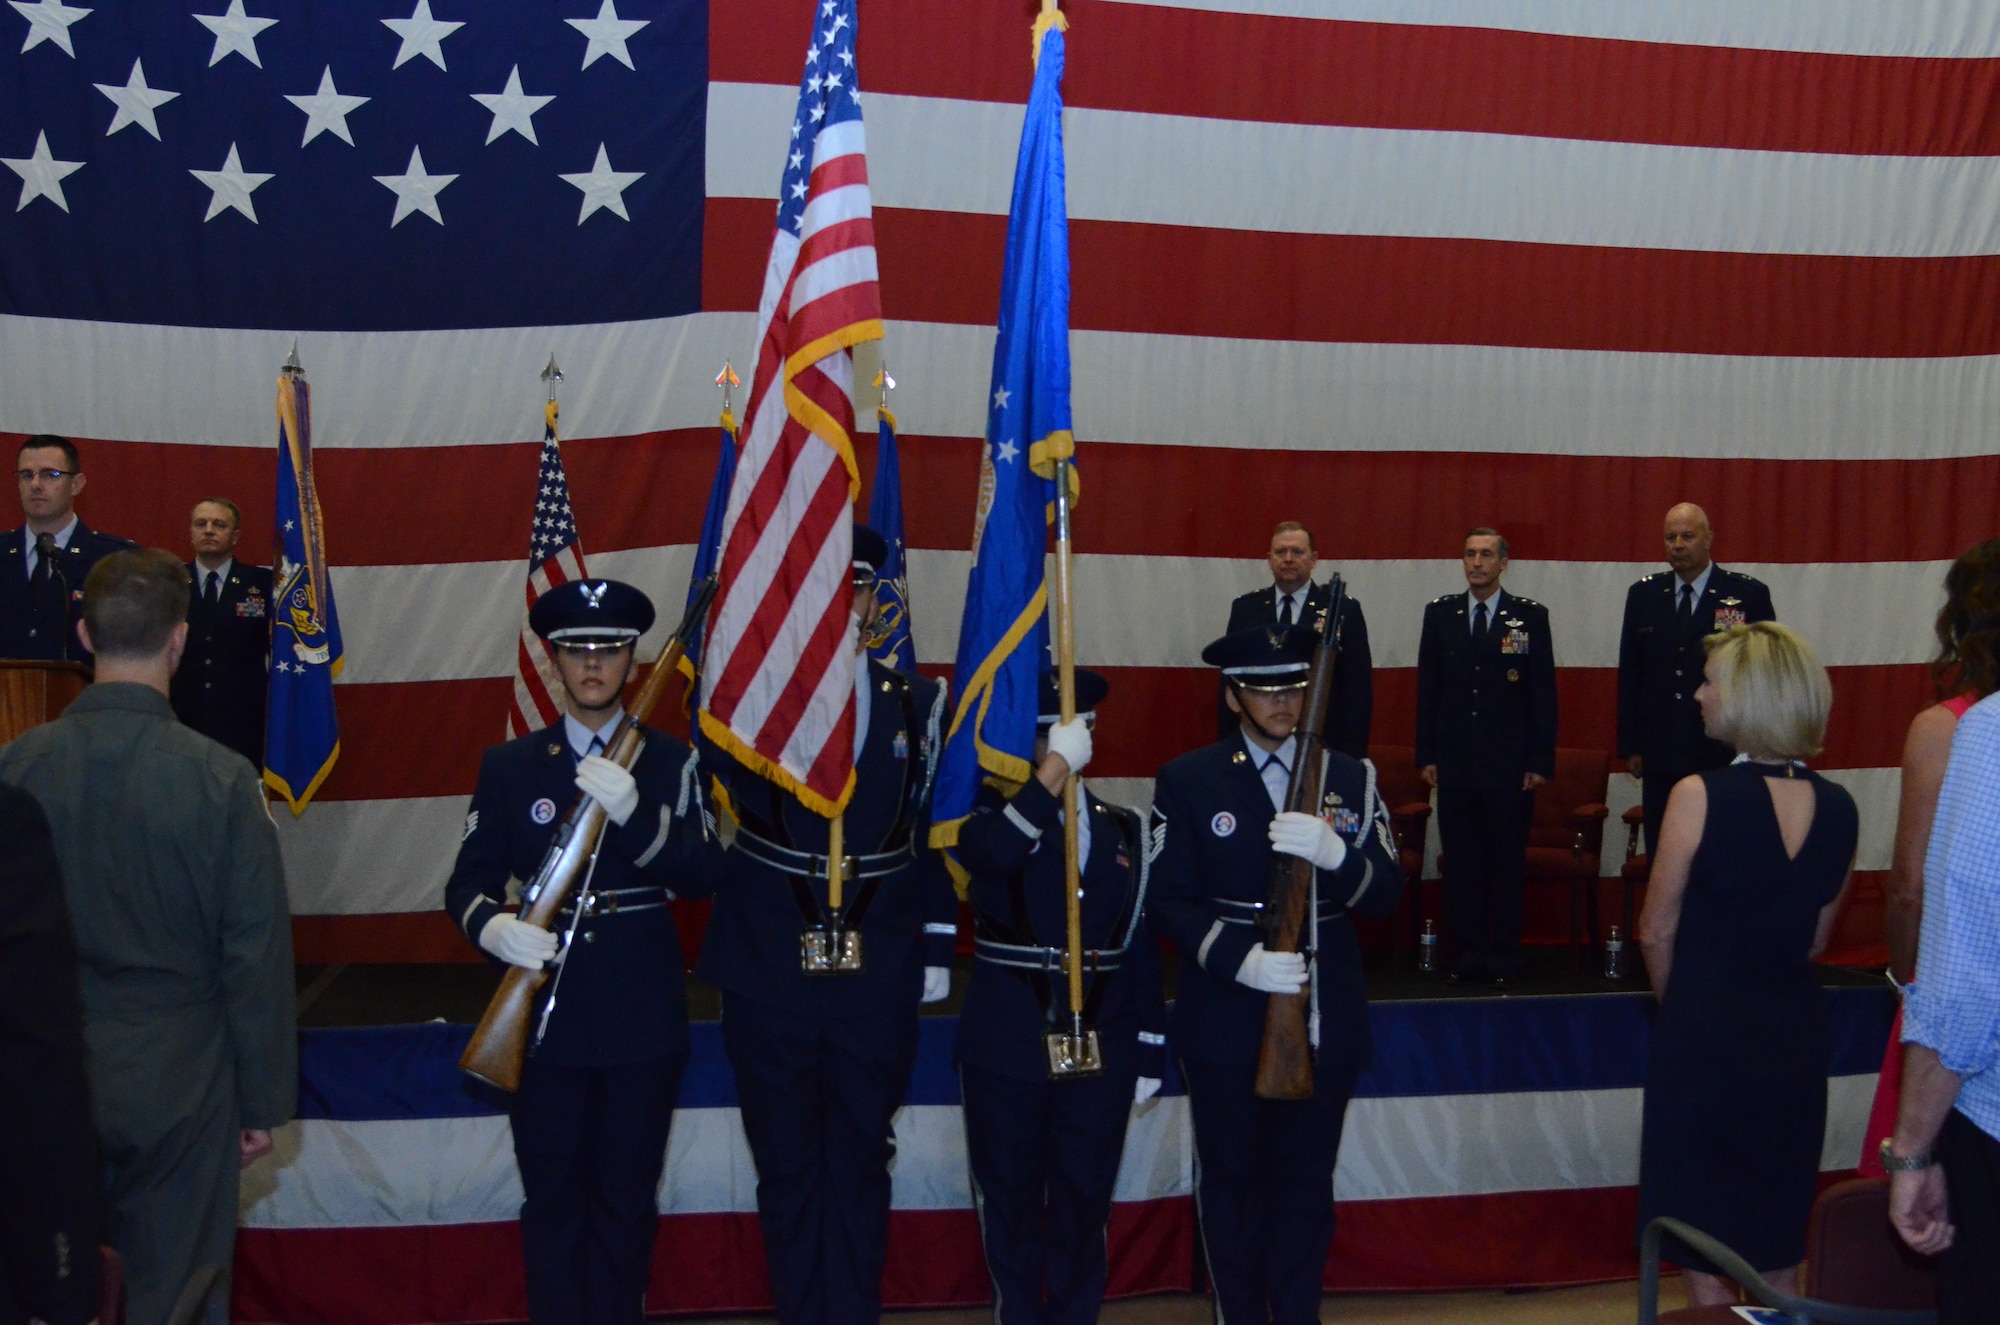 As part of the Tenth Air Force Change of Command ceremony, the 301st Fighter Wing color Guard presents the colors May 10 at Naval Air Station Fort Worth Joint Reserve Base, Texas.